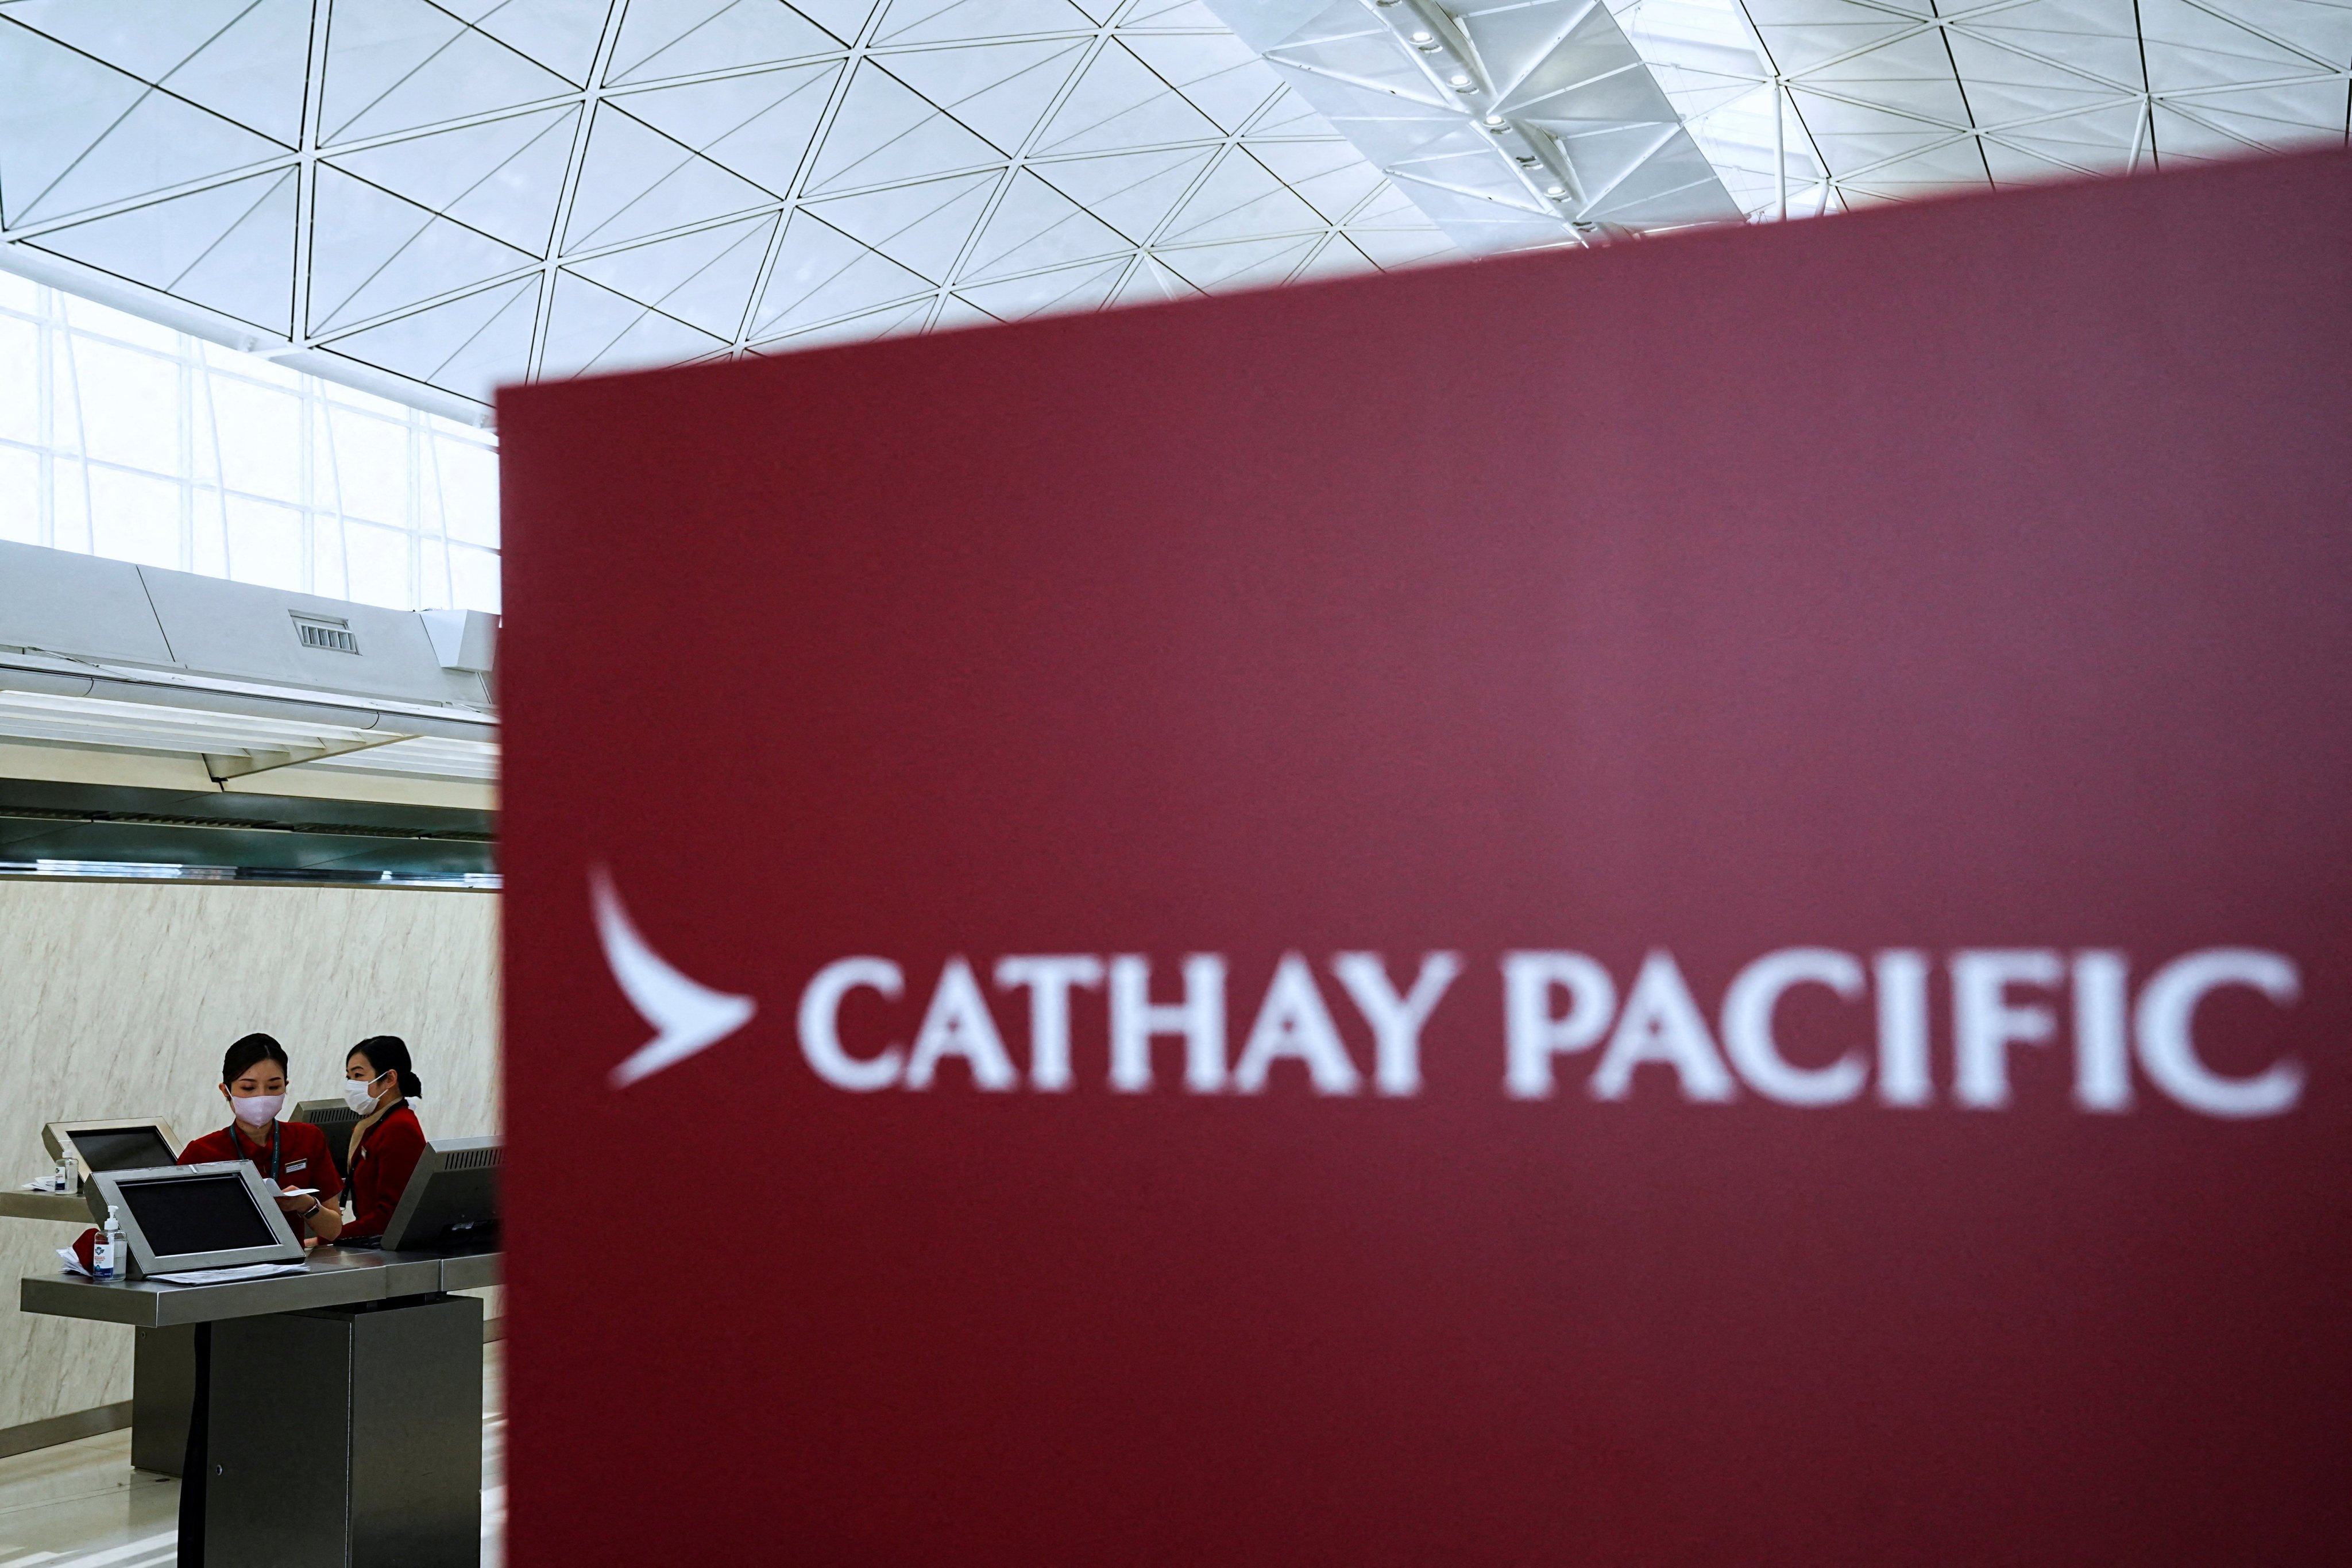 Cathay Pacific employees work at the Hong Kong International Airport on March 8. Hong Kong politicians and the government should make it clear that discrimination is unacceptable but that the scandal was an isolated case. Photo: Reuters